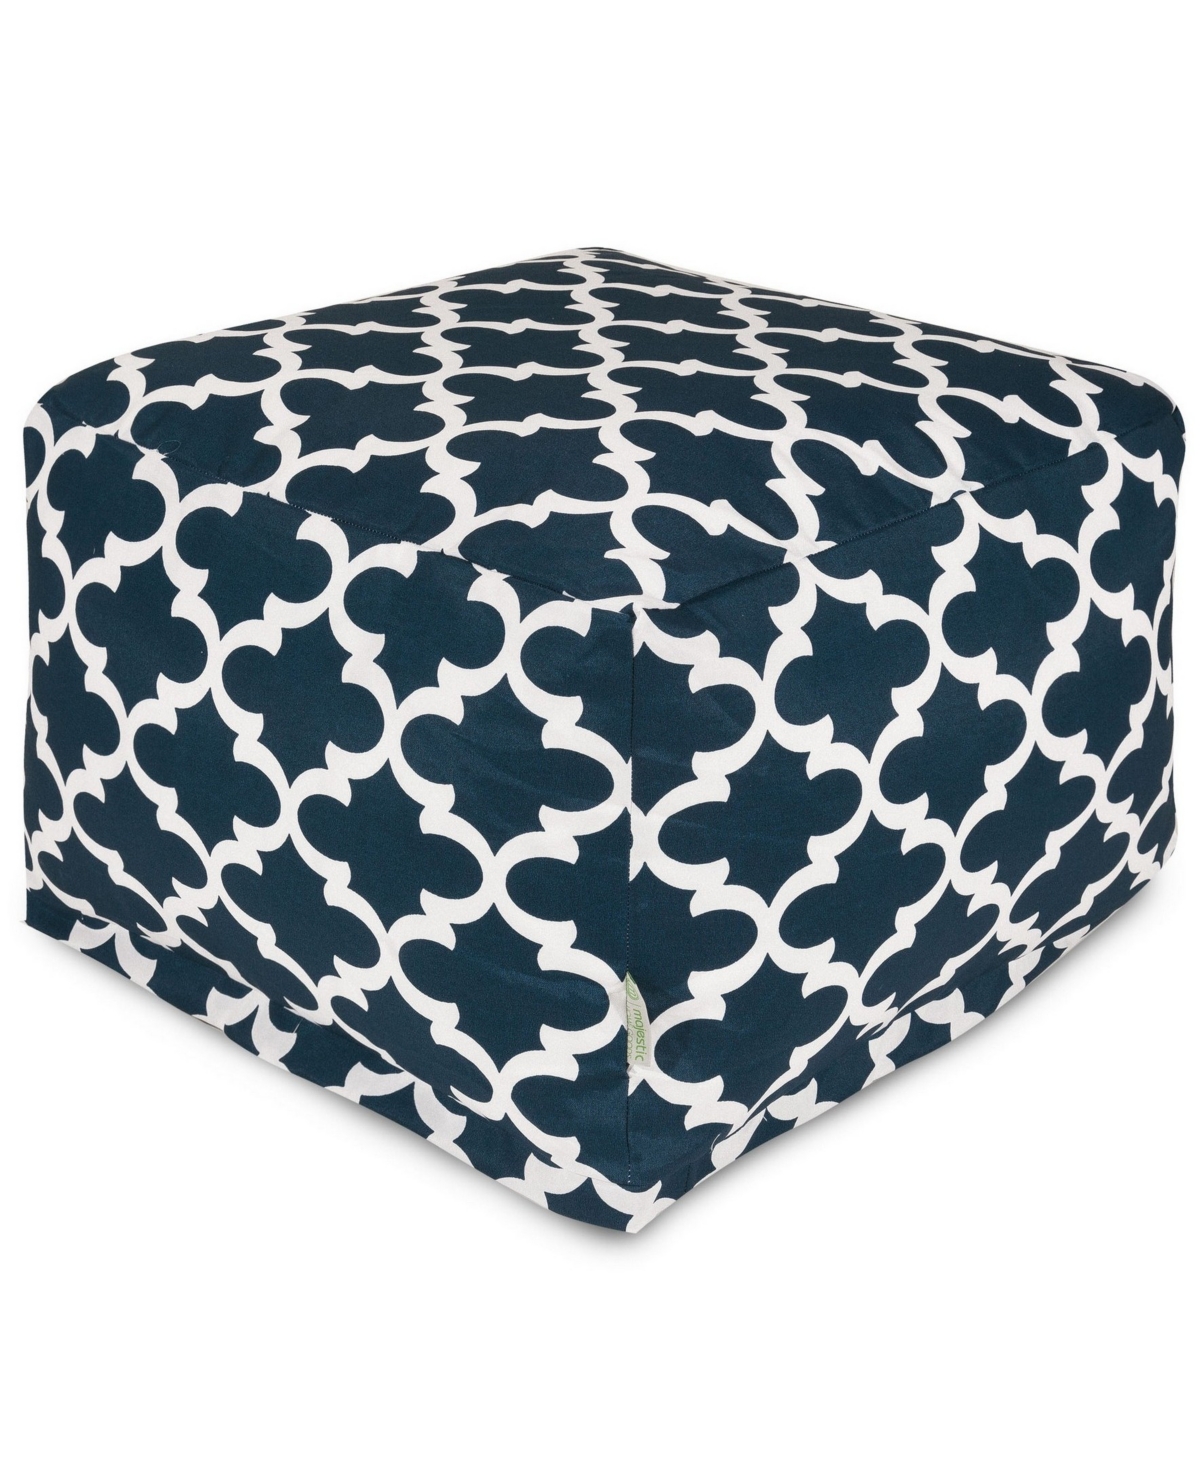 UPC 859072202795 product image for Majestic Home Goods Trellis Ottoman Square Pouf 27